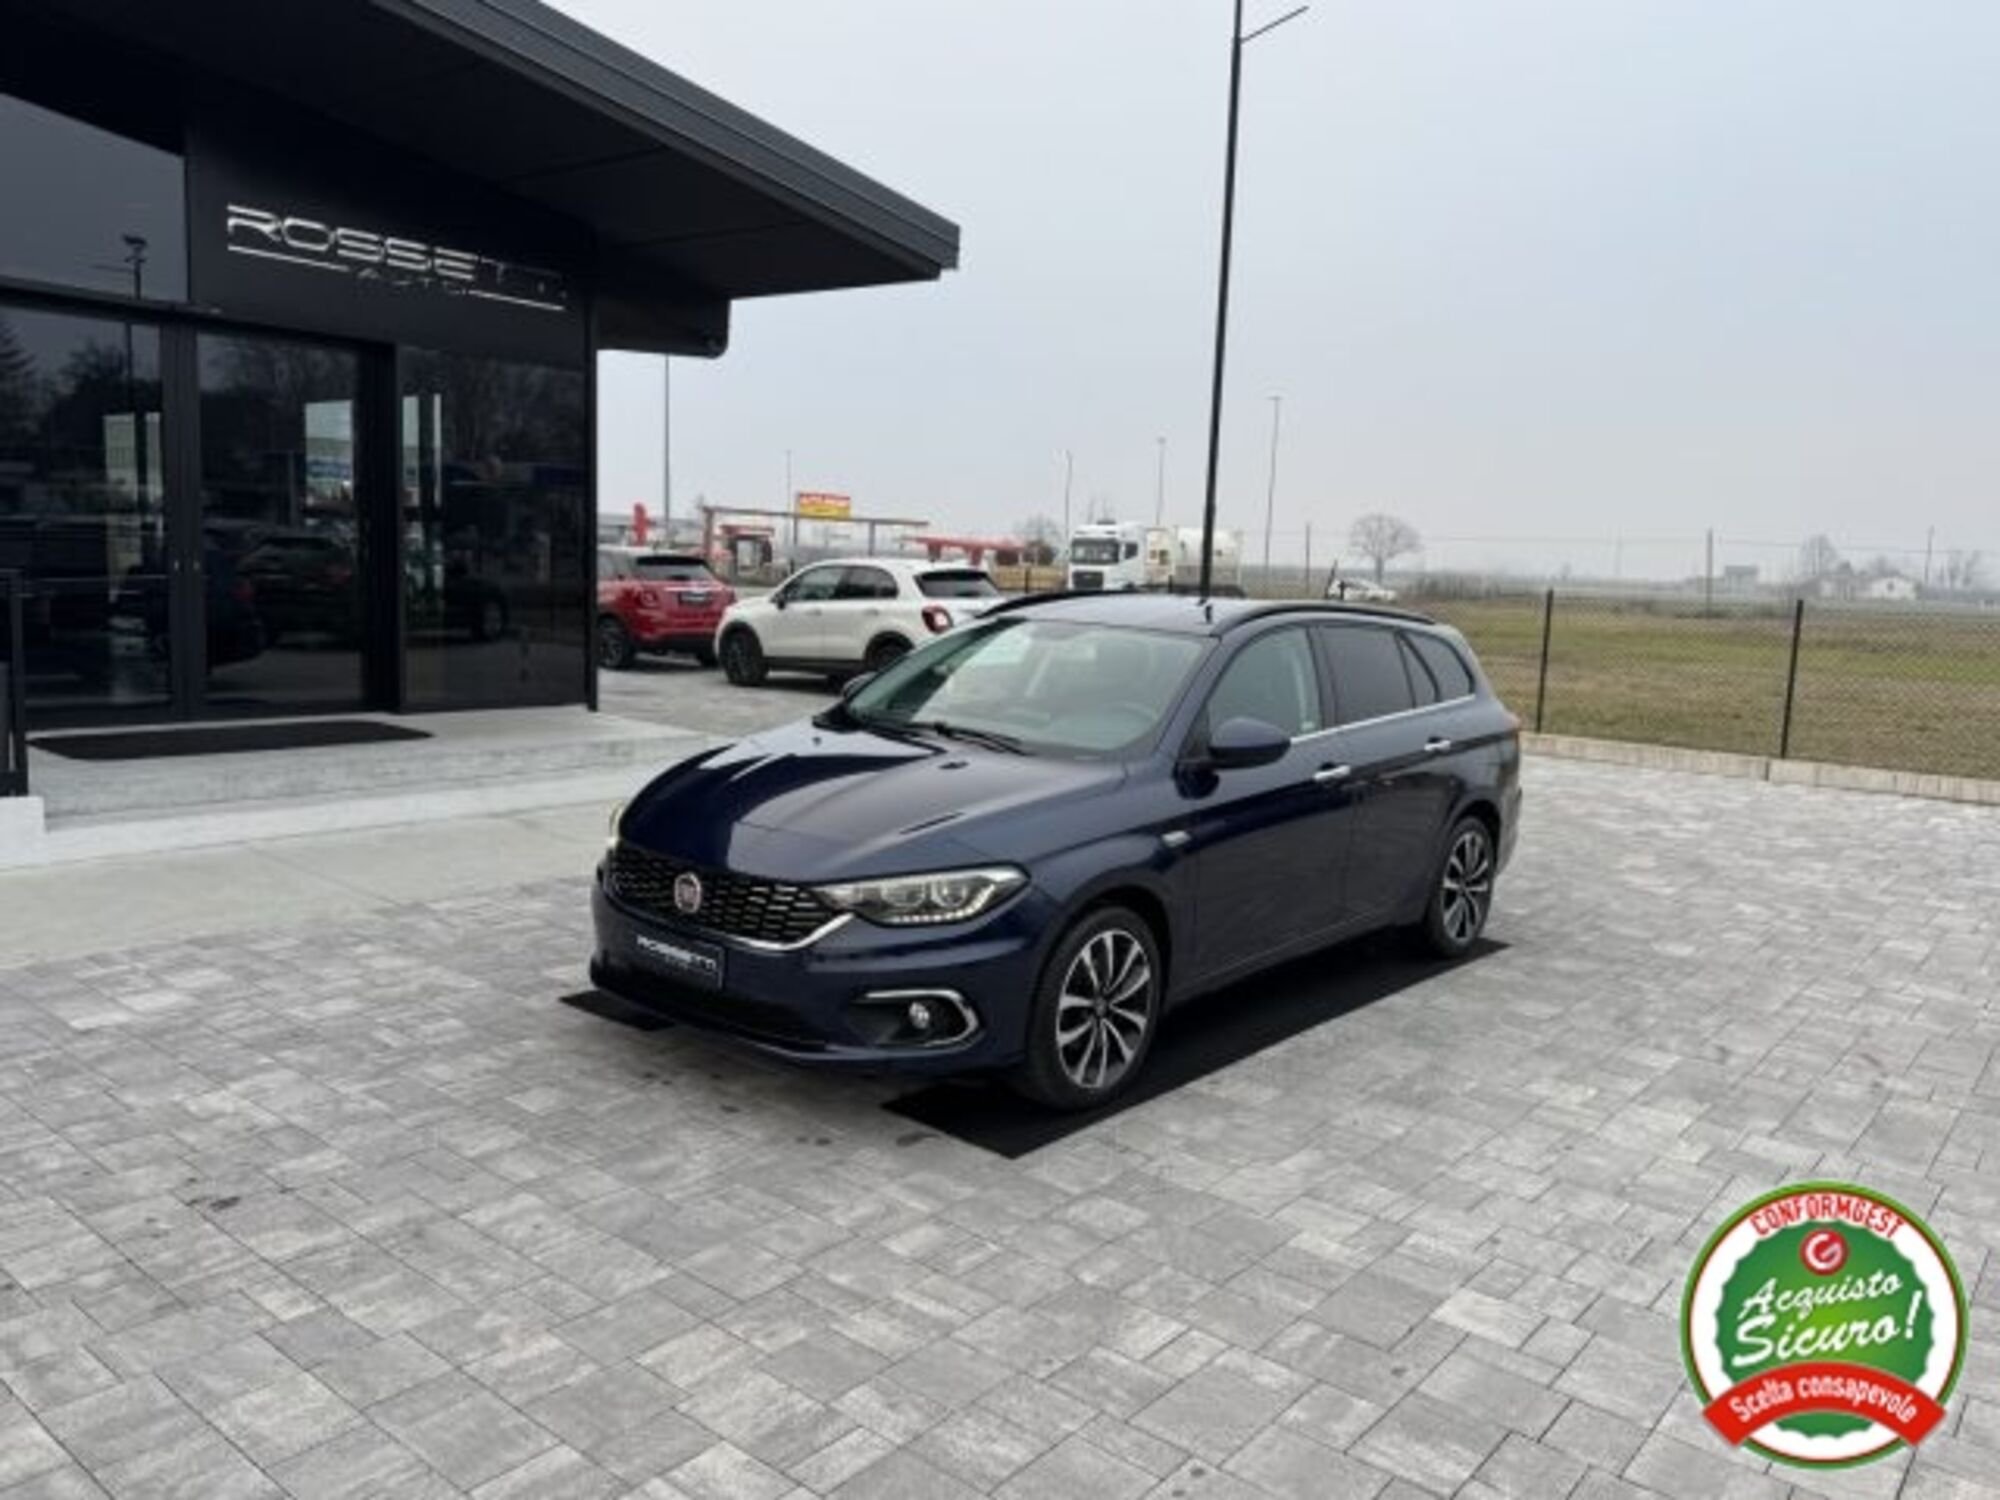 Fiat Tipo Station Wagon Tipo 1.6 Mjt S&S SW Lounge my 16 usato